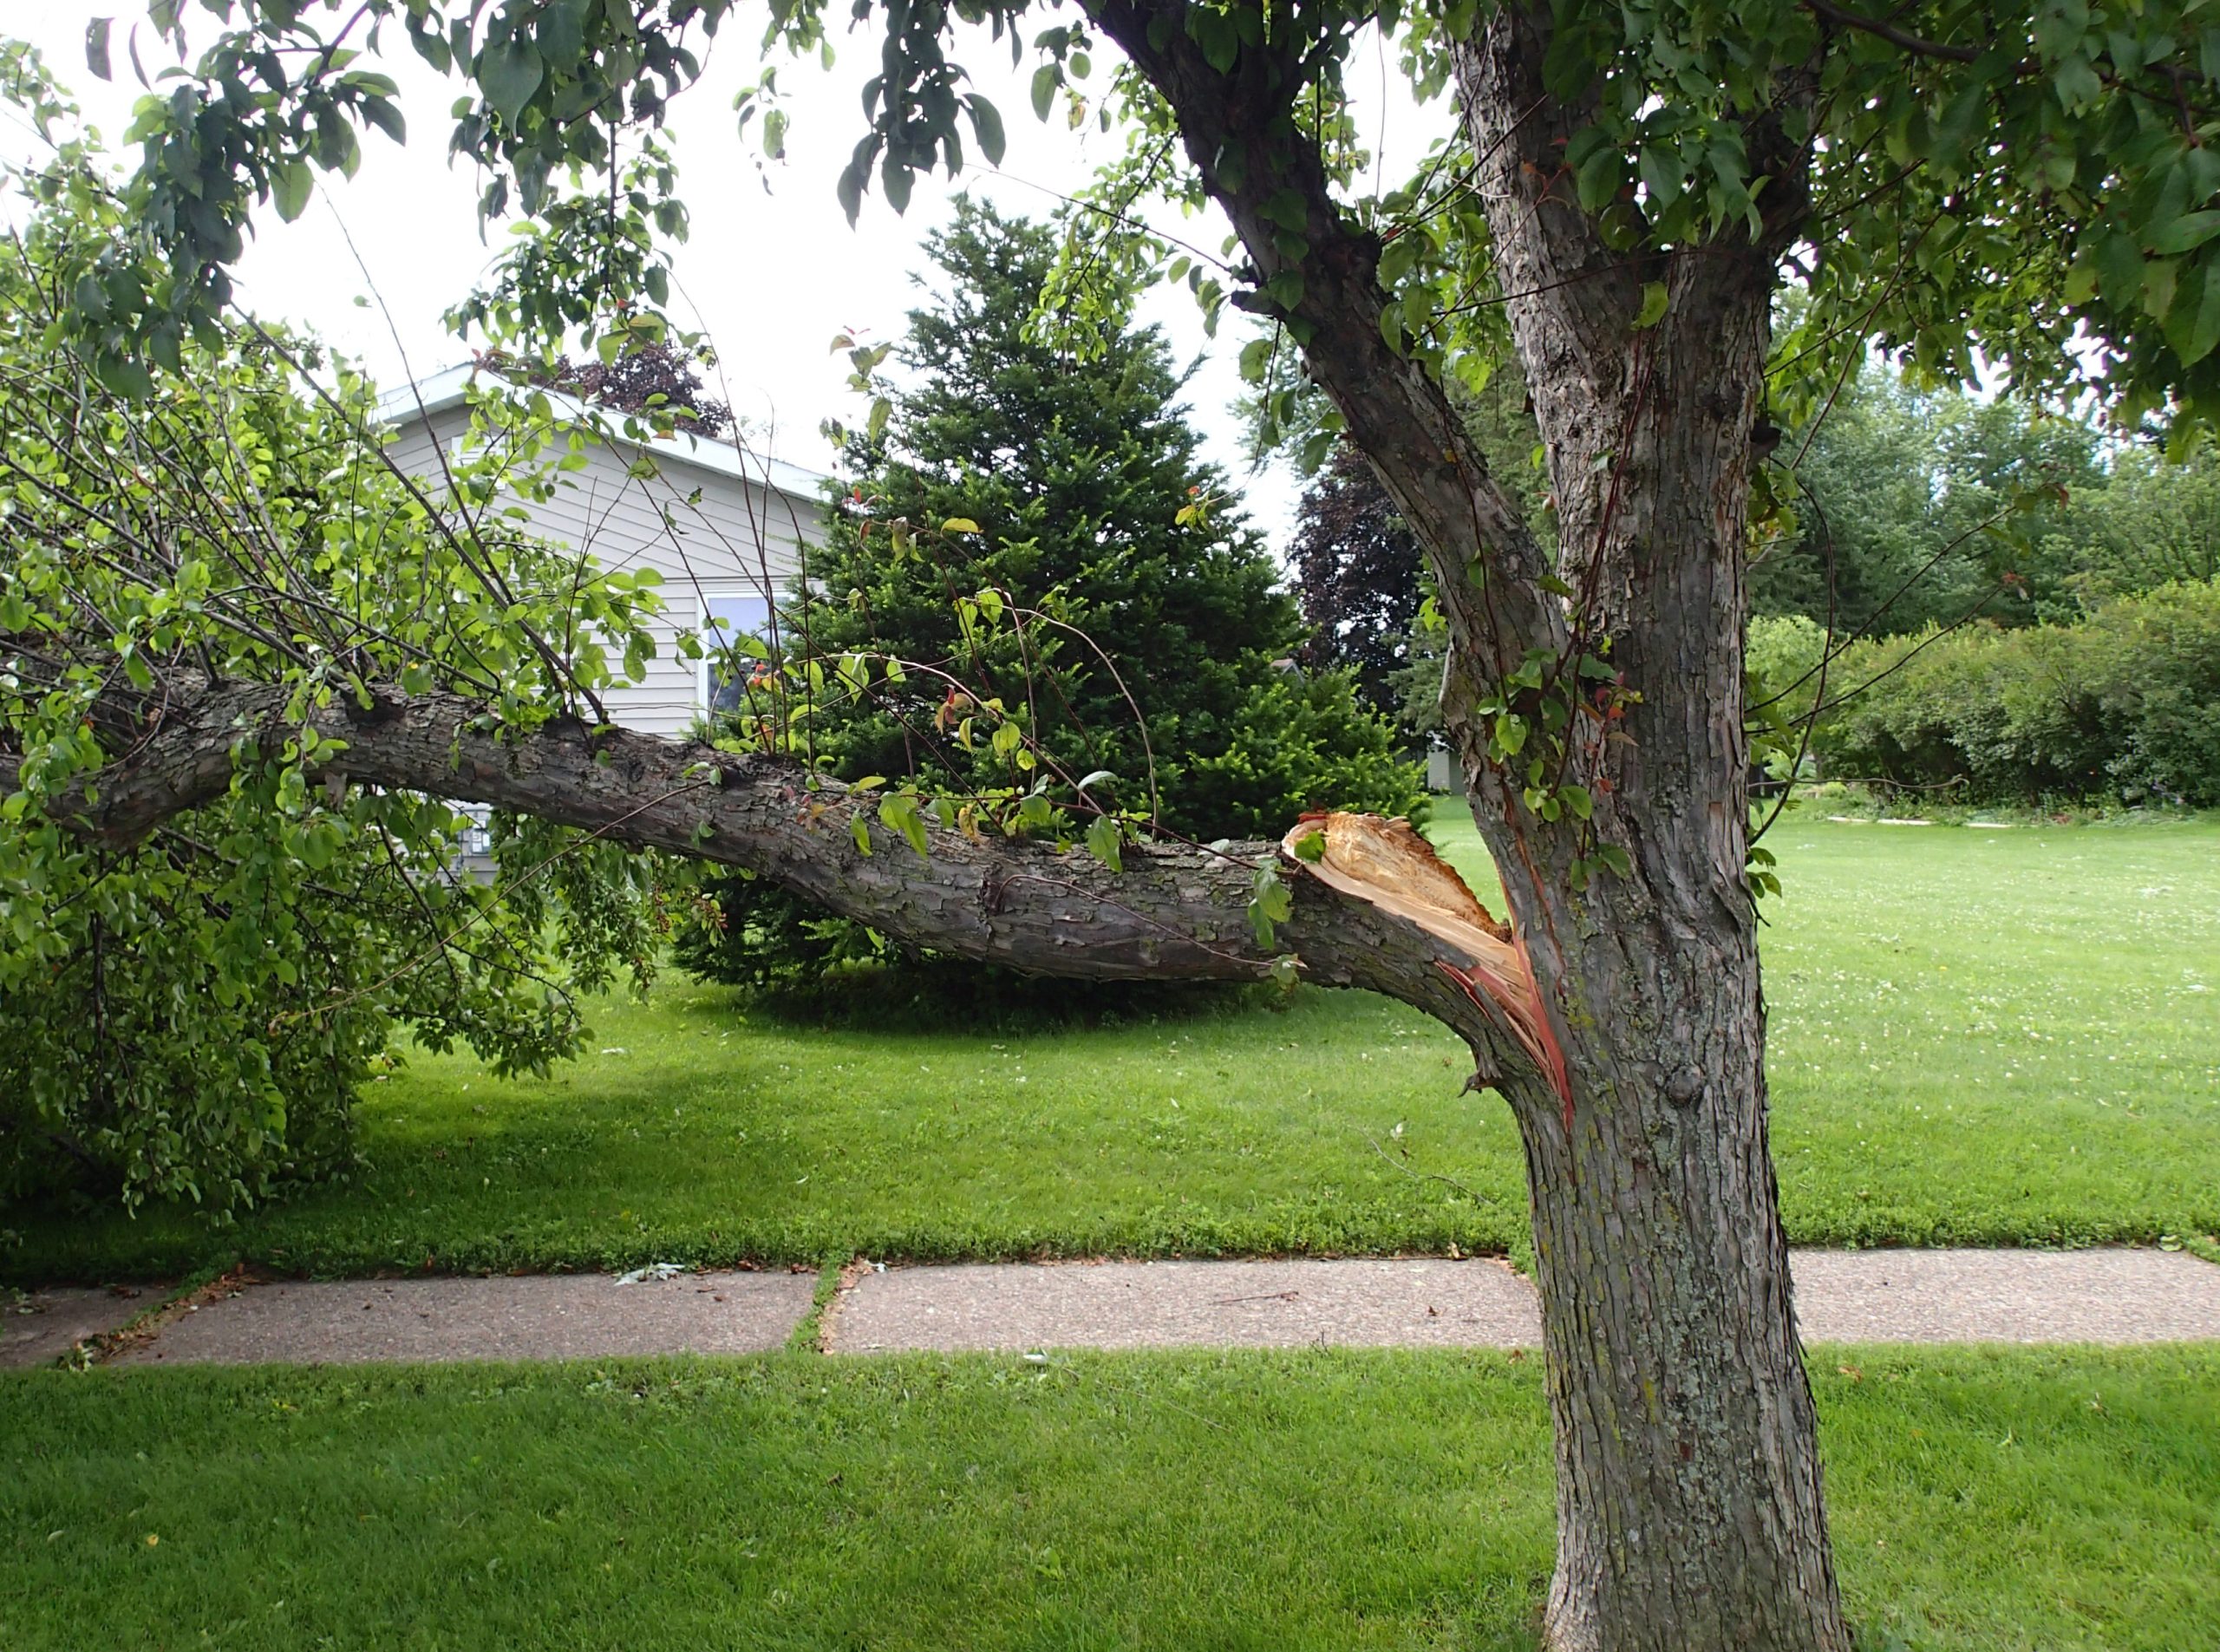 Broken tree limb from storm damage laying on a lawn (Photo: iStock - Dcwcreations)